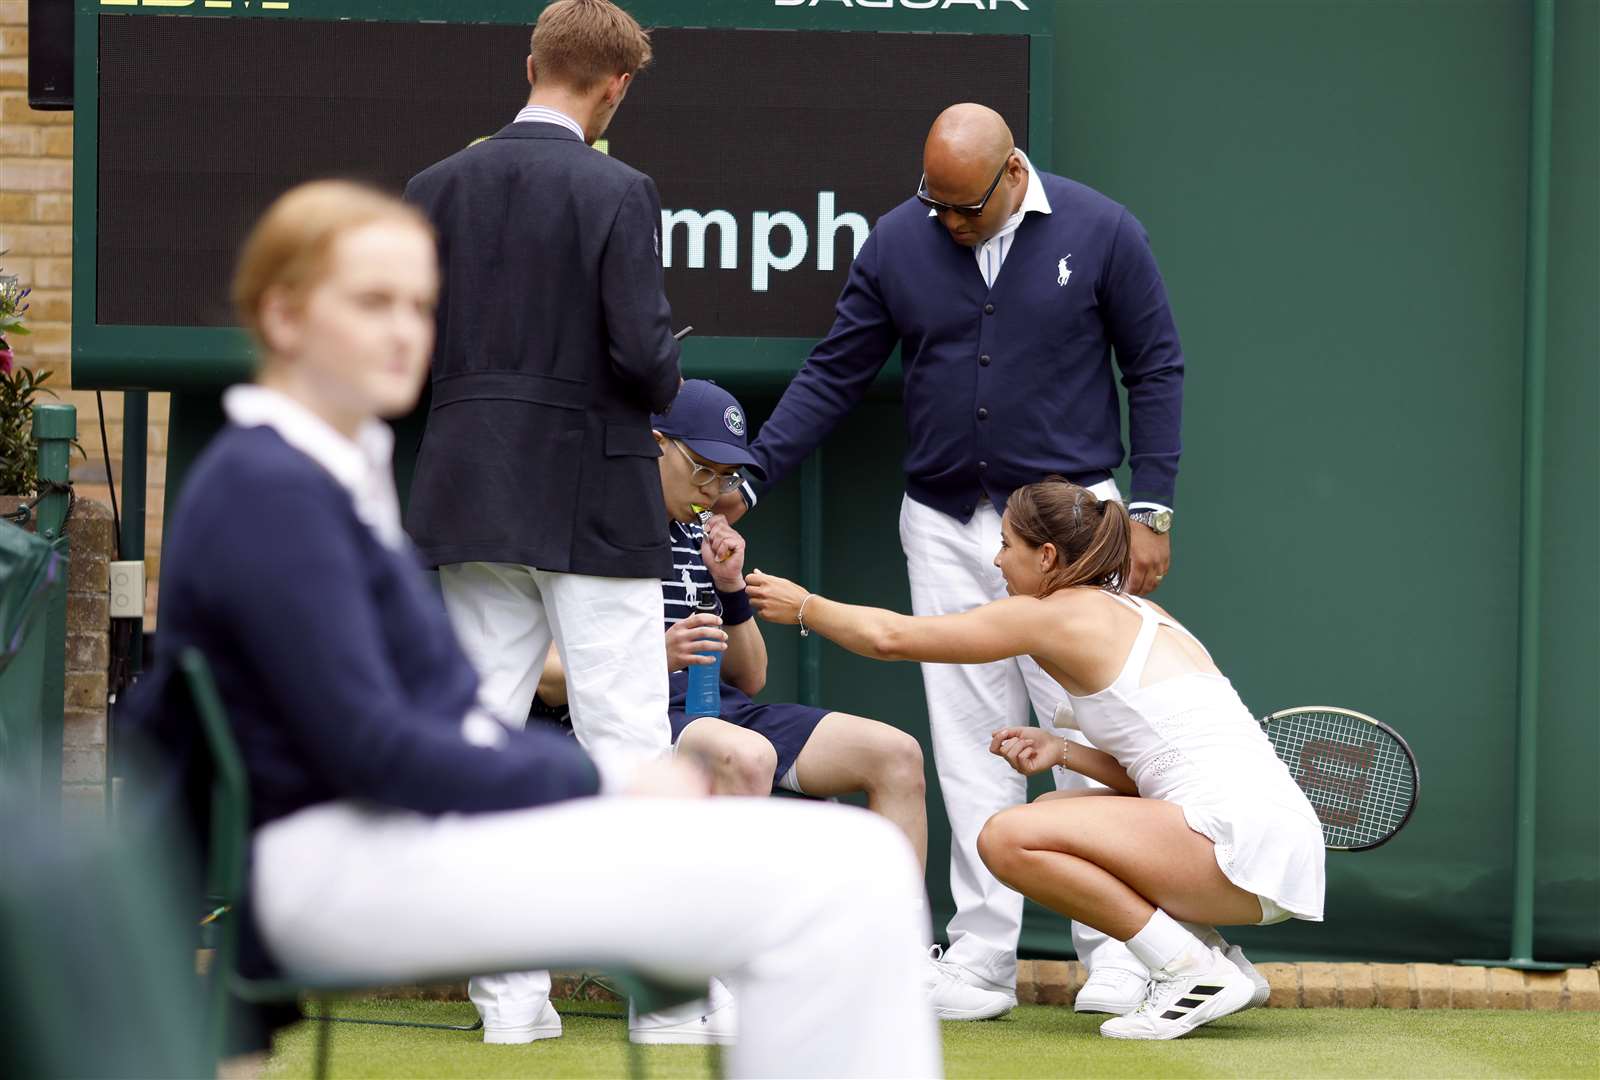 Jodie Burrage helps a ball boy during her match against Lesia Tsurenko (Steven Paston/PA).